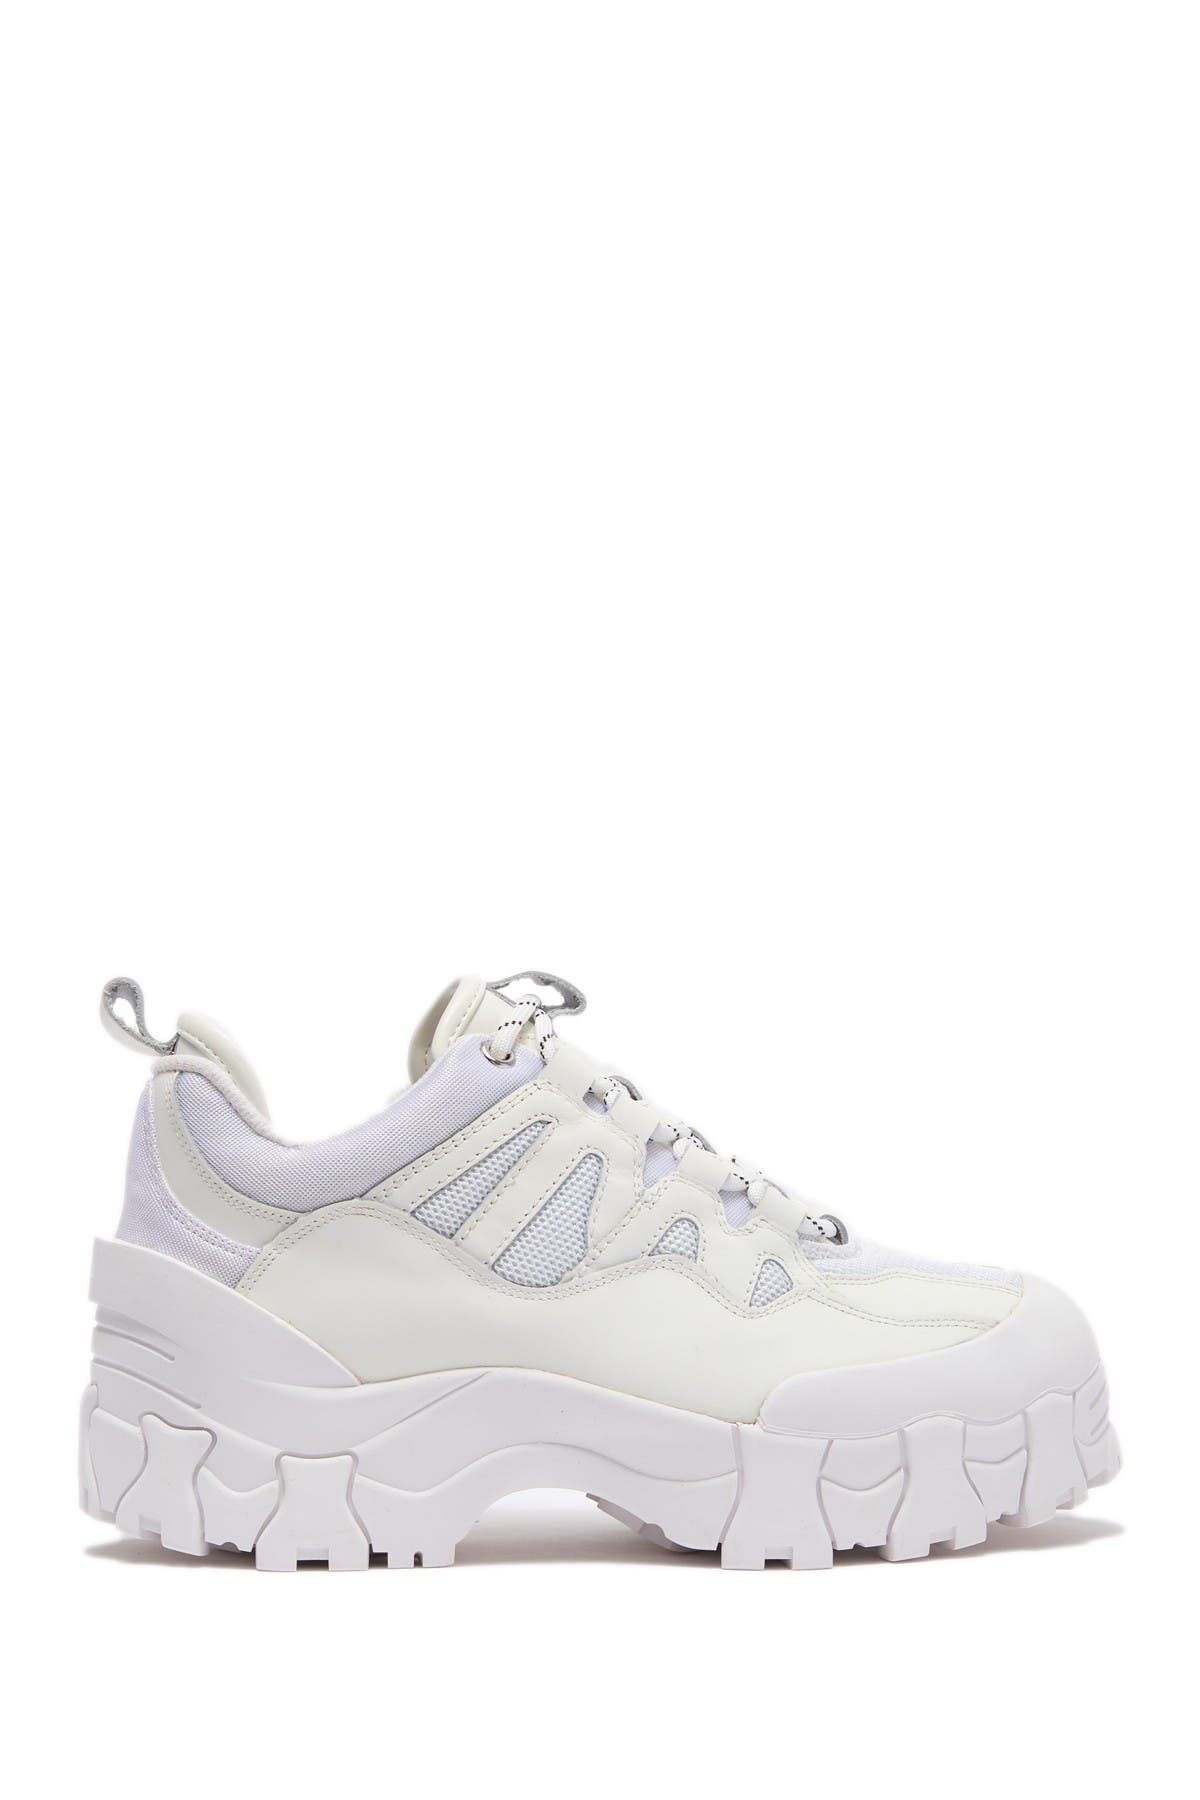 jeffrey campbell chunky sneakers